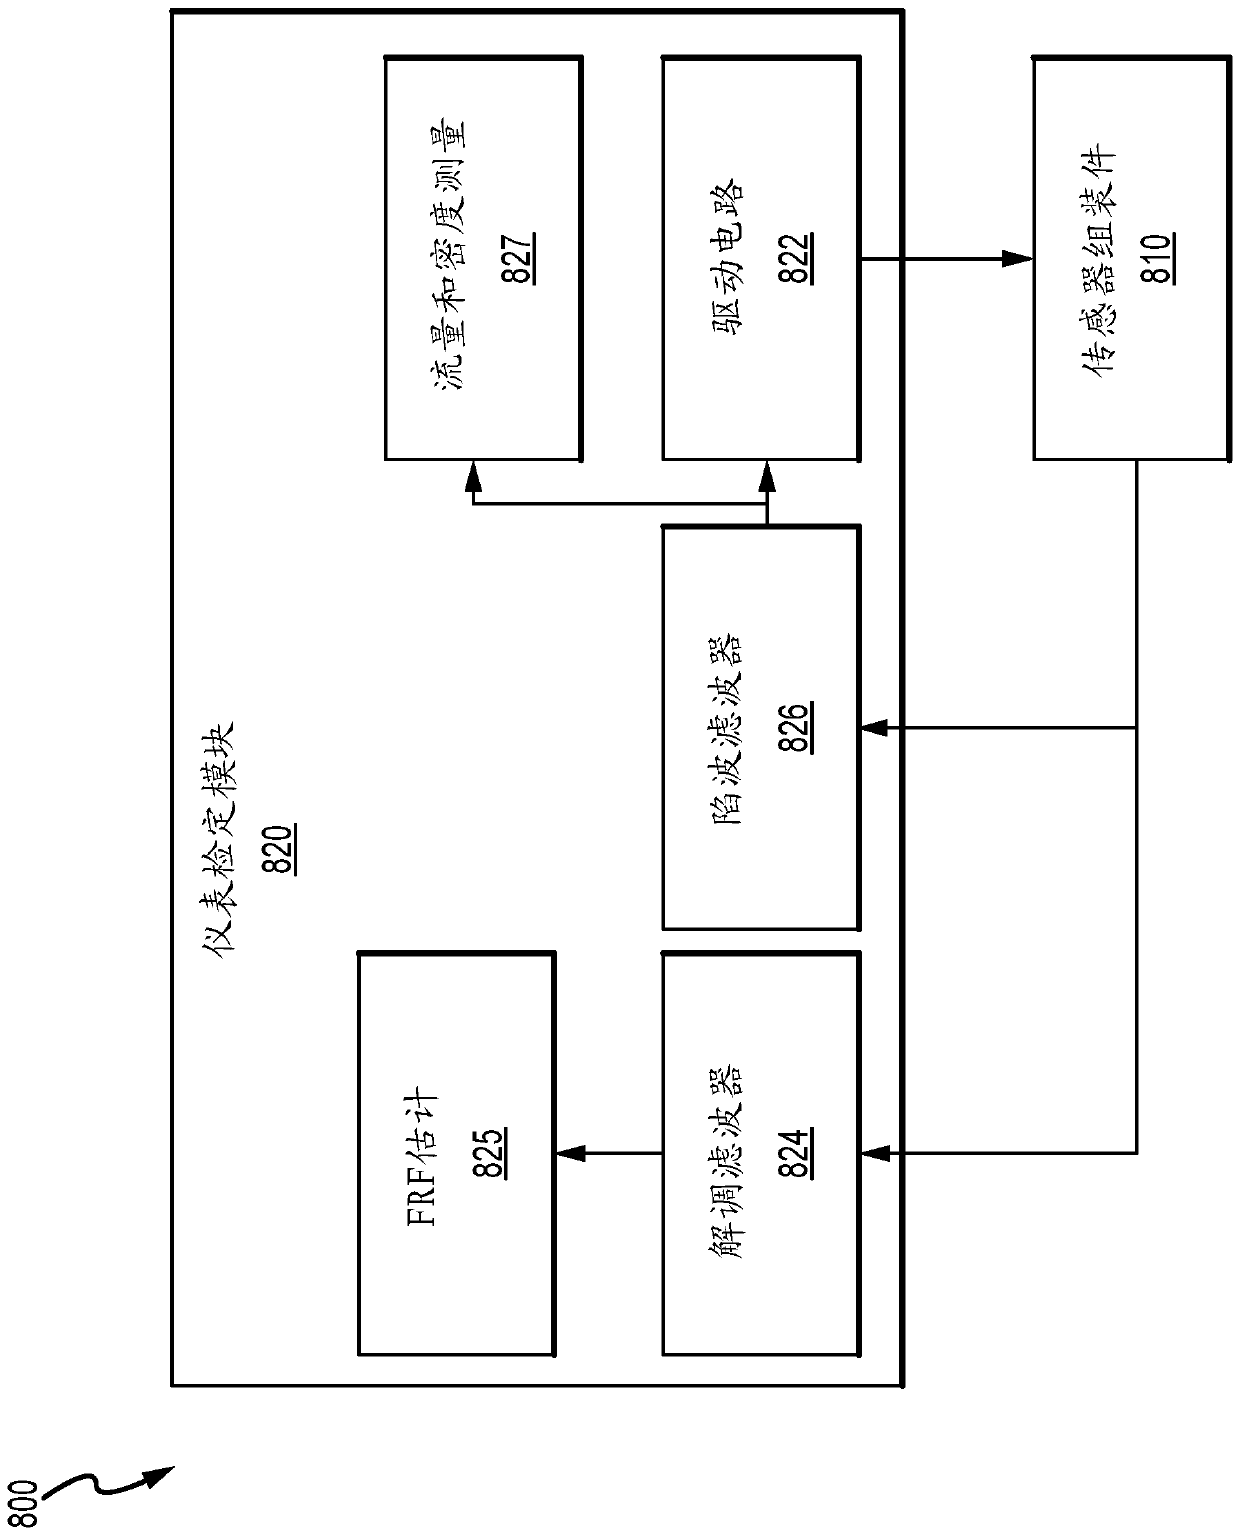 Frequency spacings to prevent intermodulation distortion signal interference